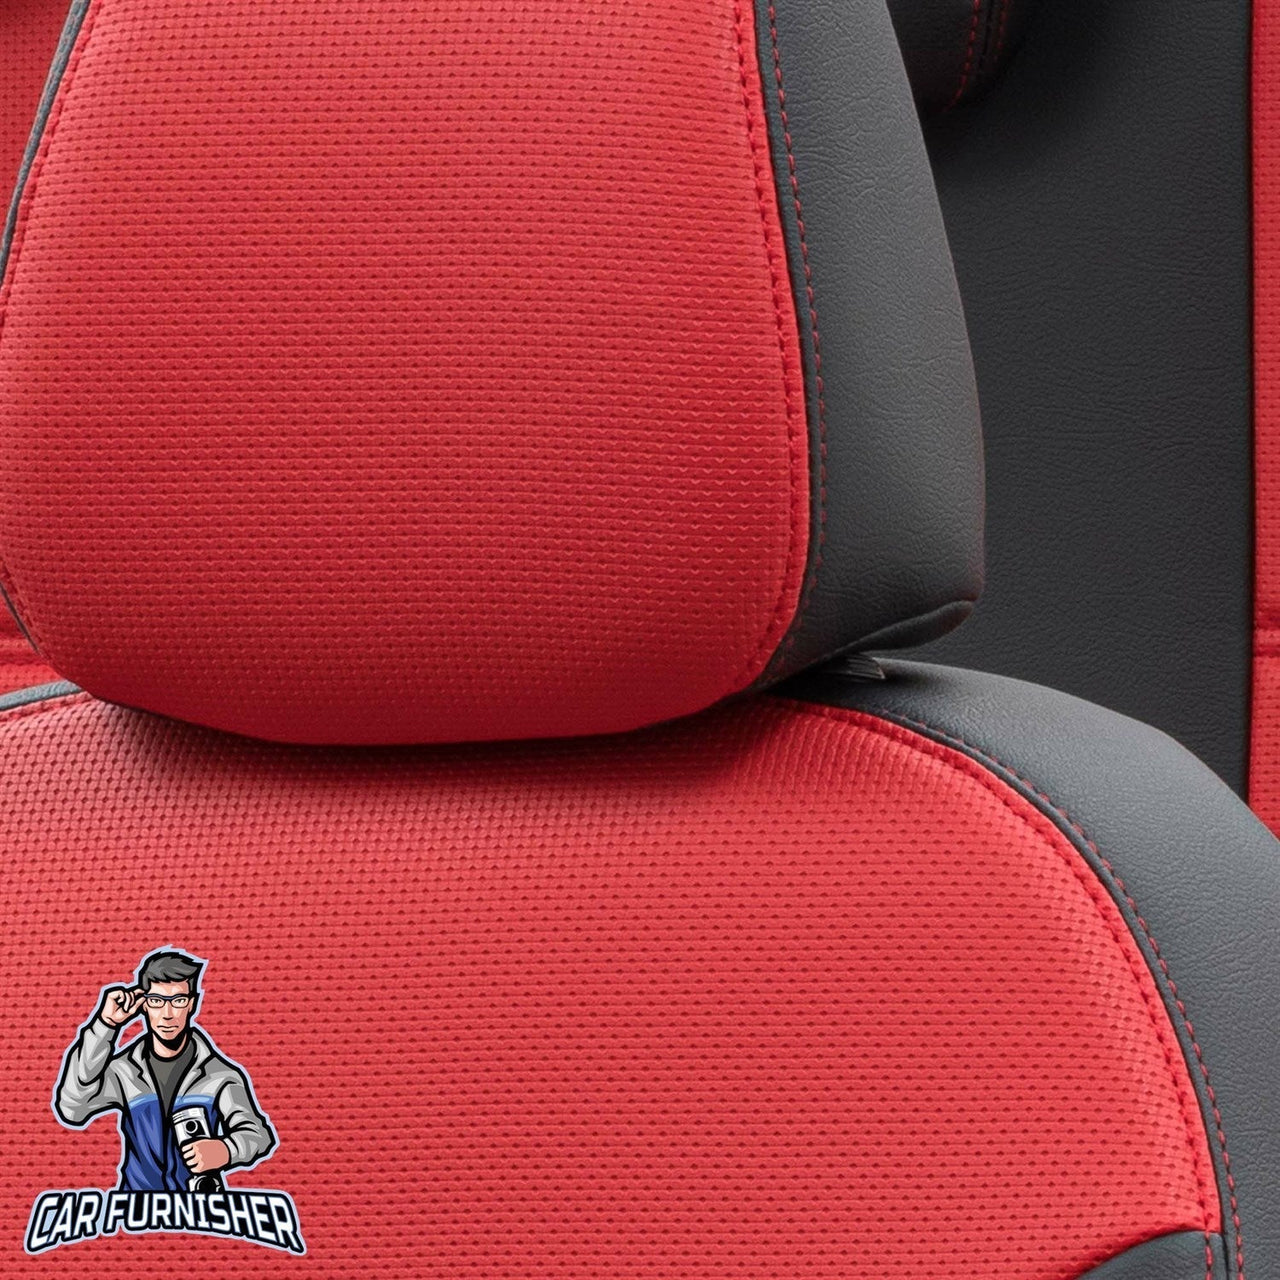 Chevrolet Spark Seat Covers New York Leather Design Red Leather